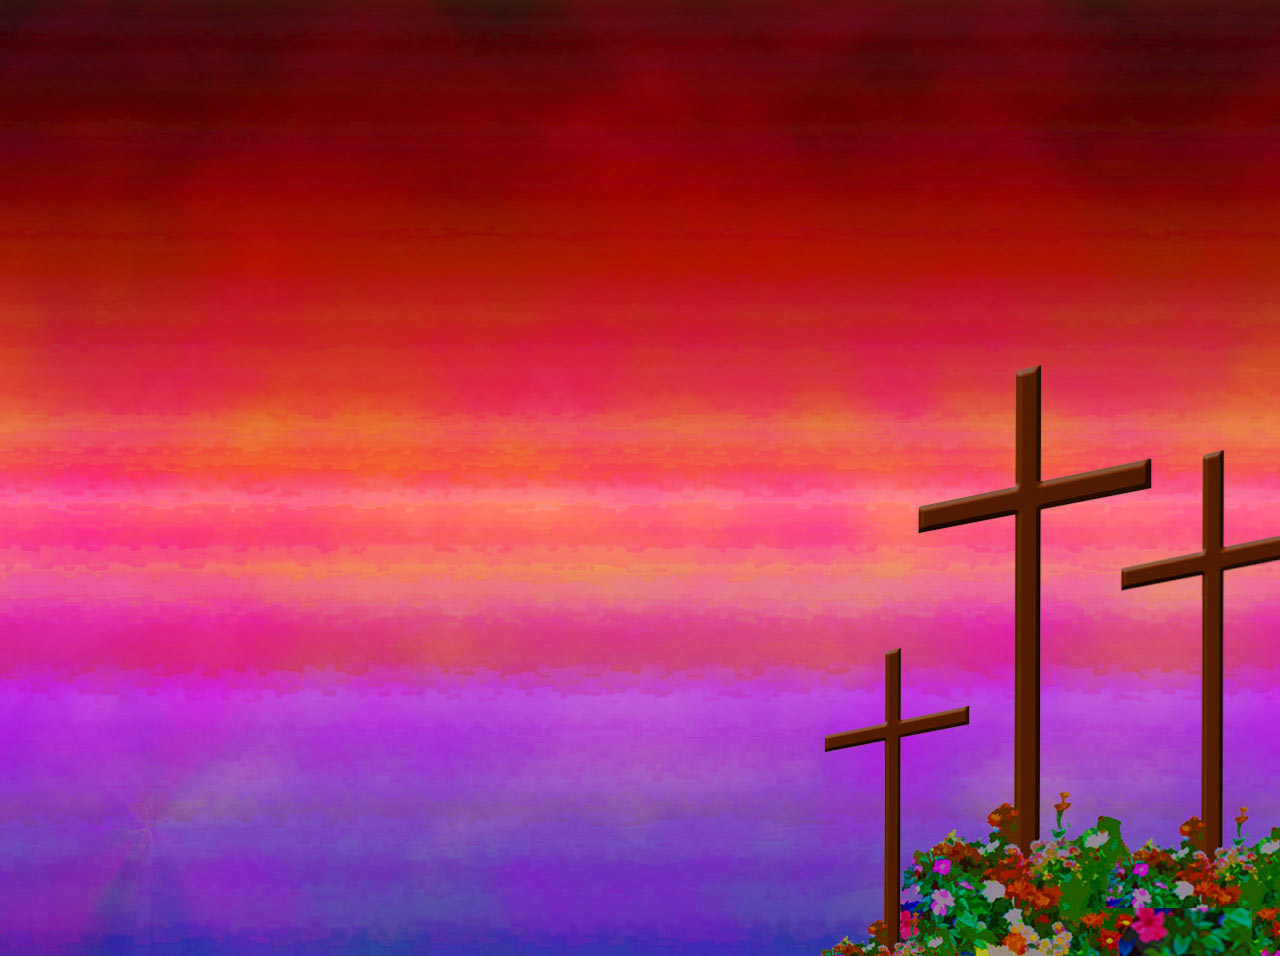 Christian rose garden Free PPT Backgrounds for your